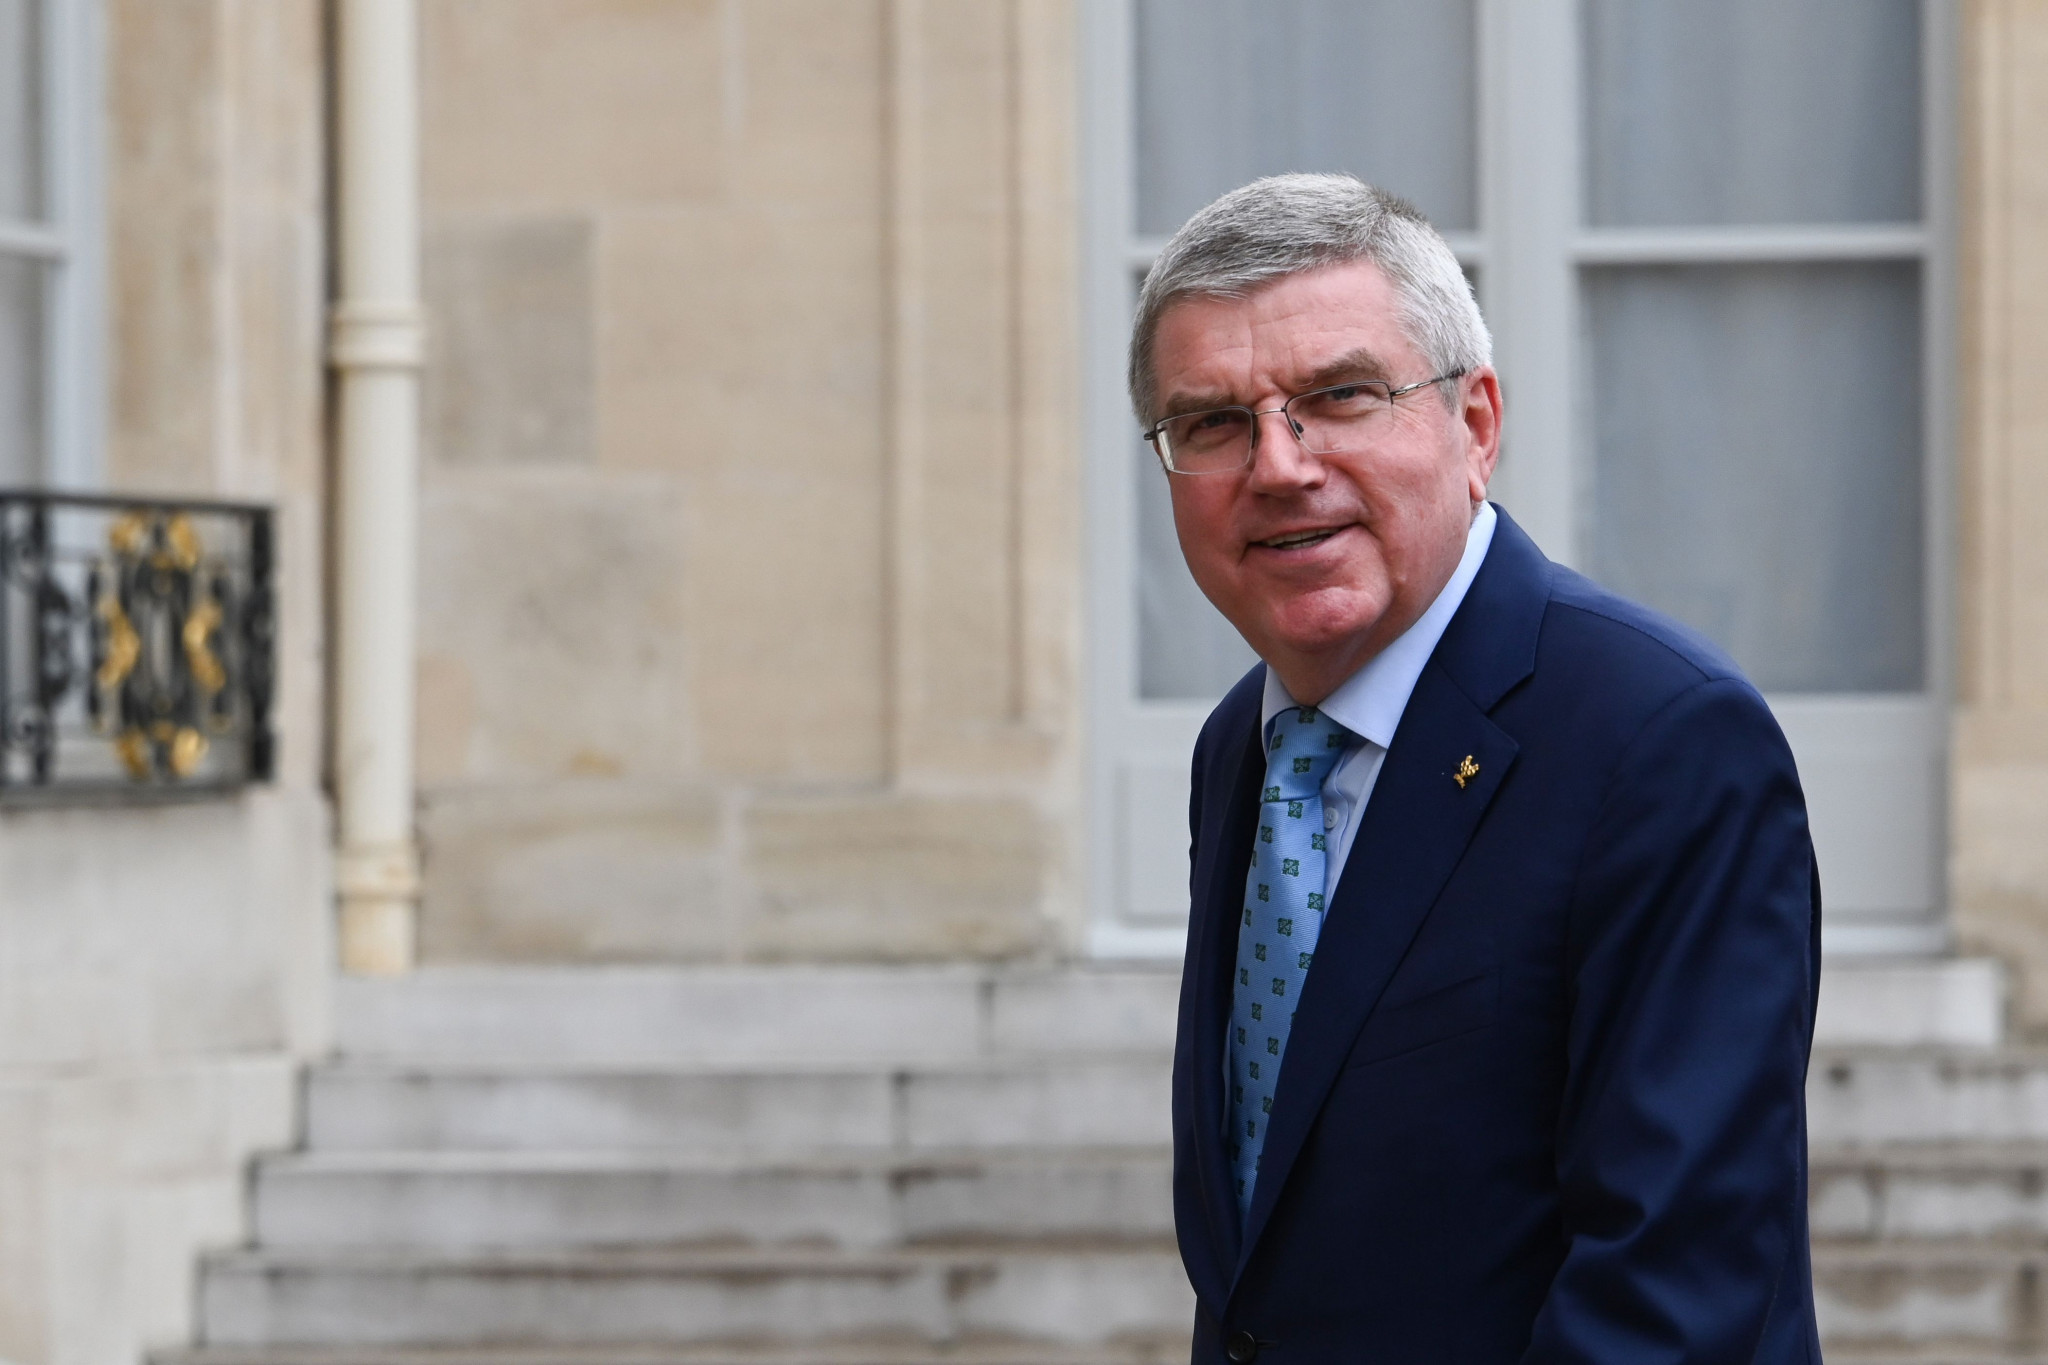 A National Sports Agency document claims Thomas Bach told French officials at Tokyo 2020 "the Games are successful when the athletes of the host country achieve great performances" ©Getty Images